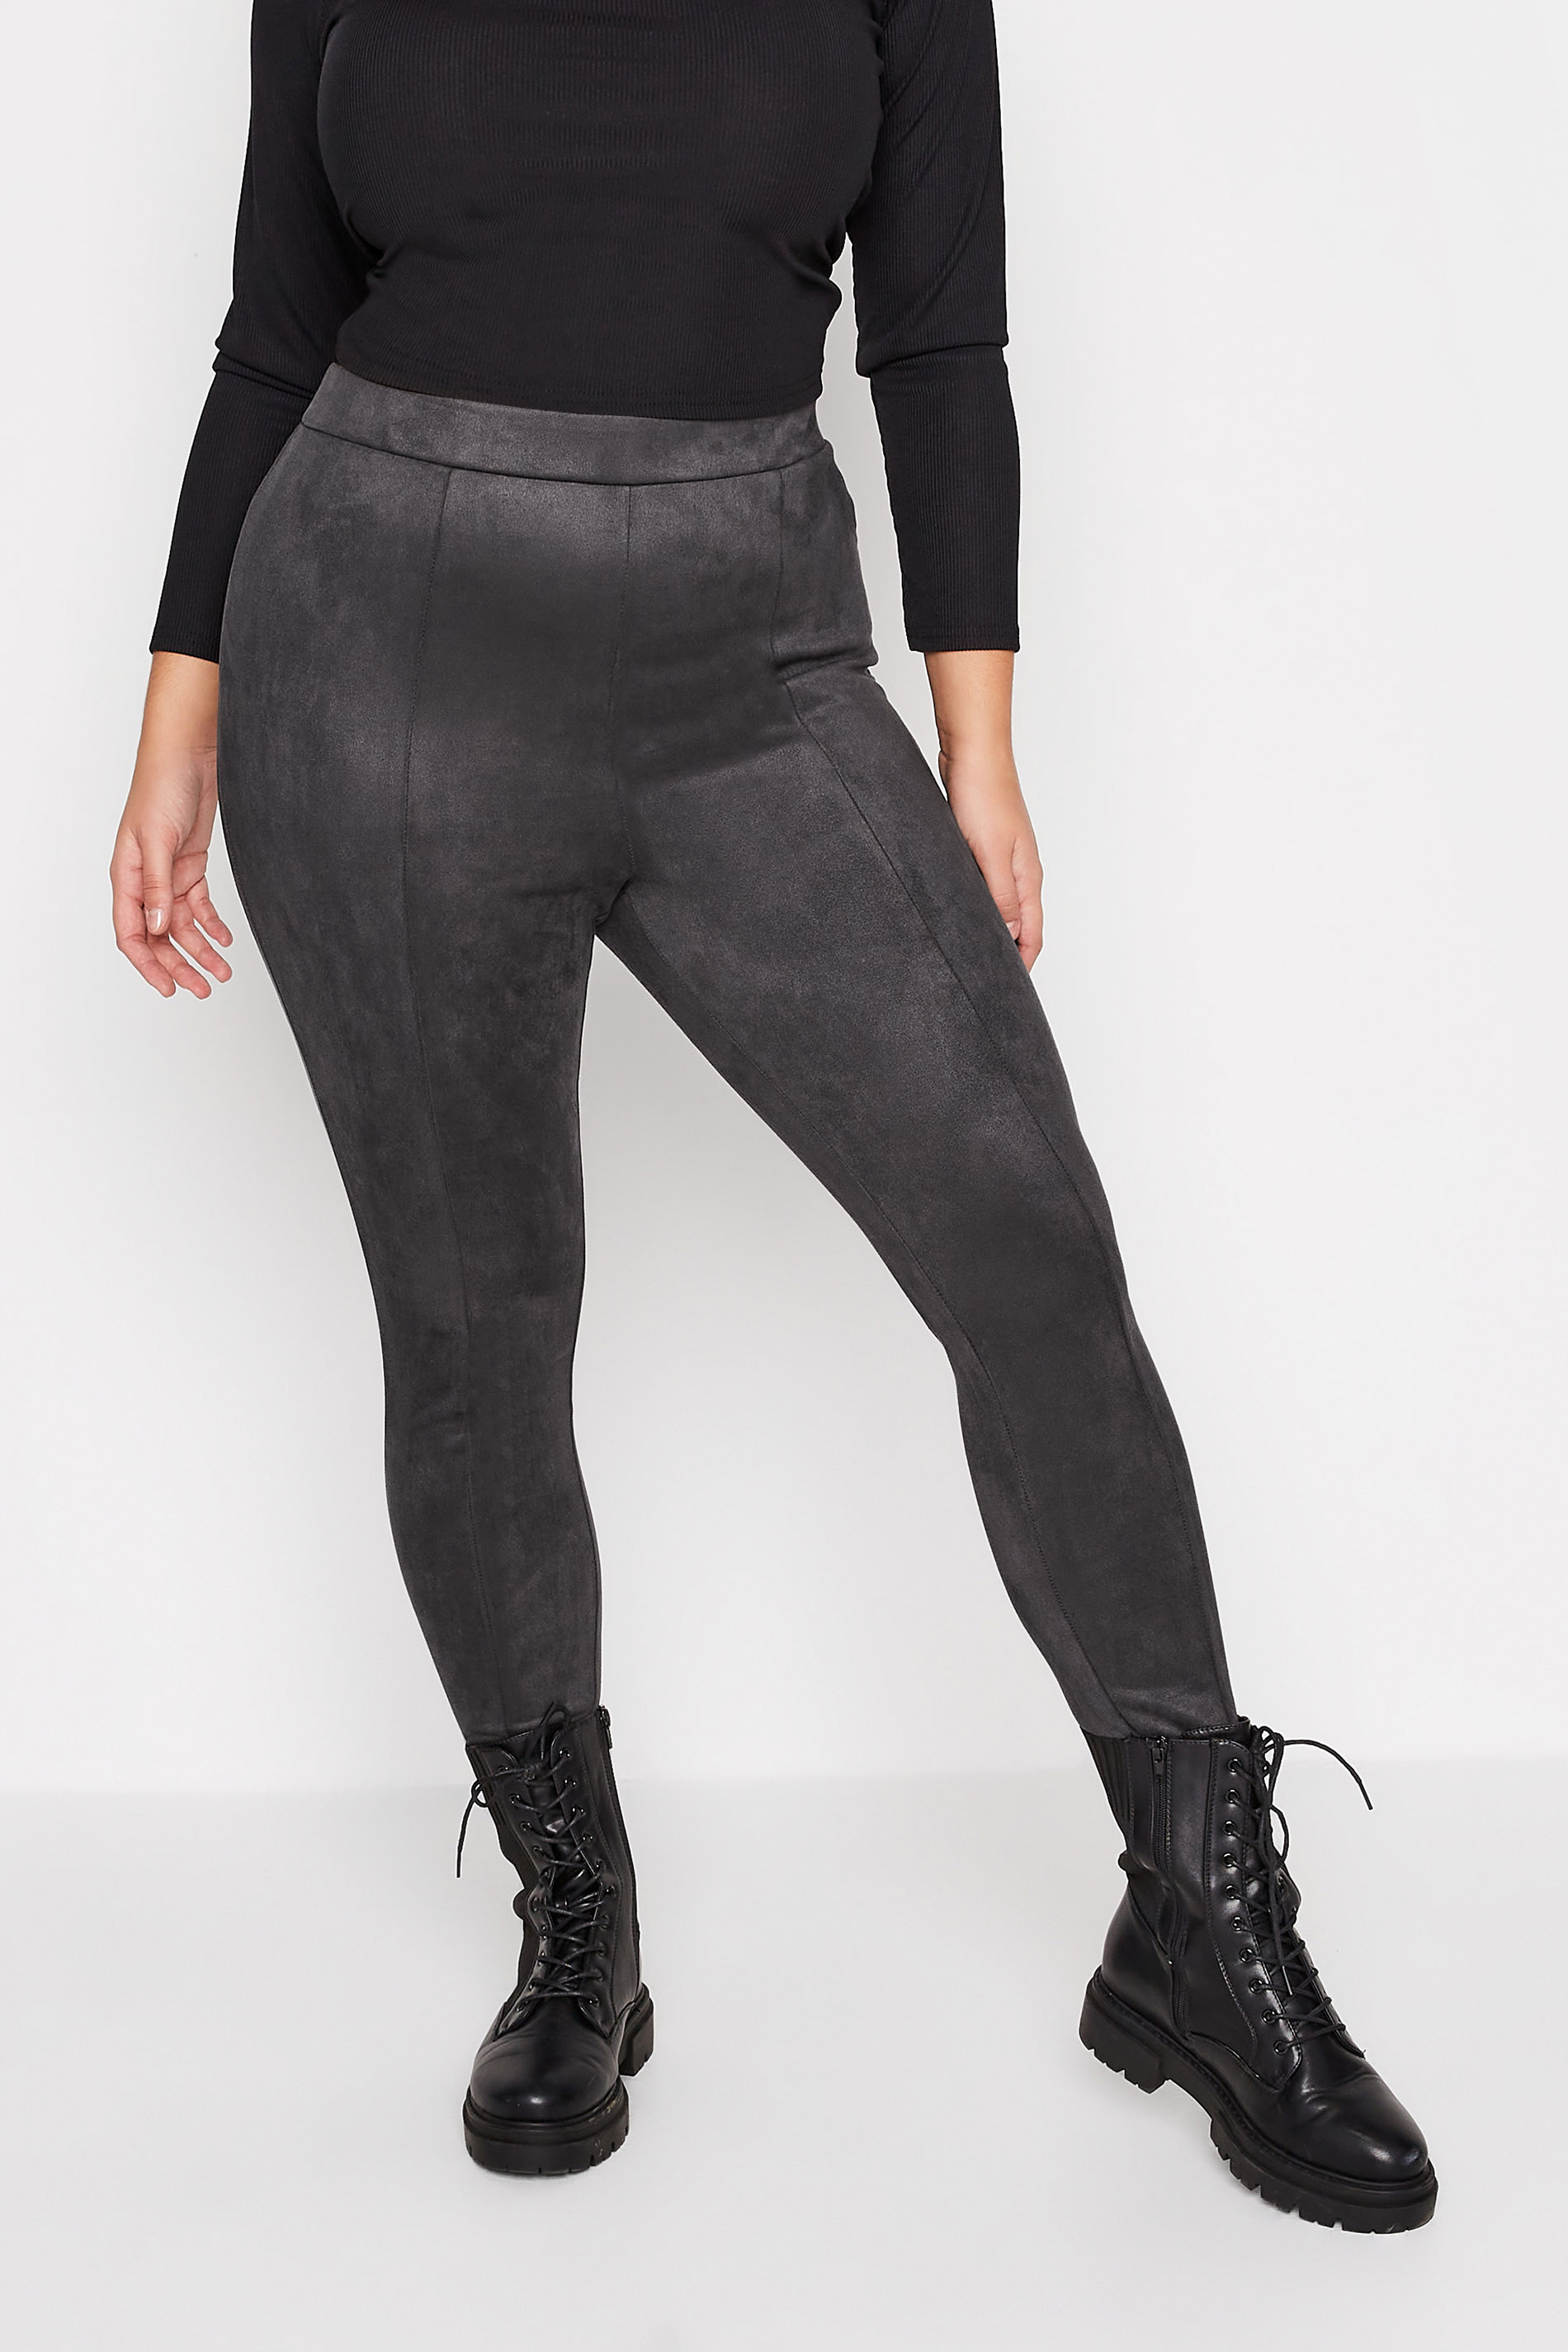 Plus Size Charcoal Grey Faux Suede High Waisted Leggings | Yours Clothing 3